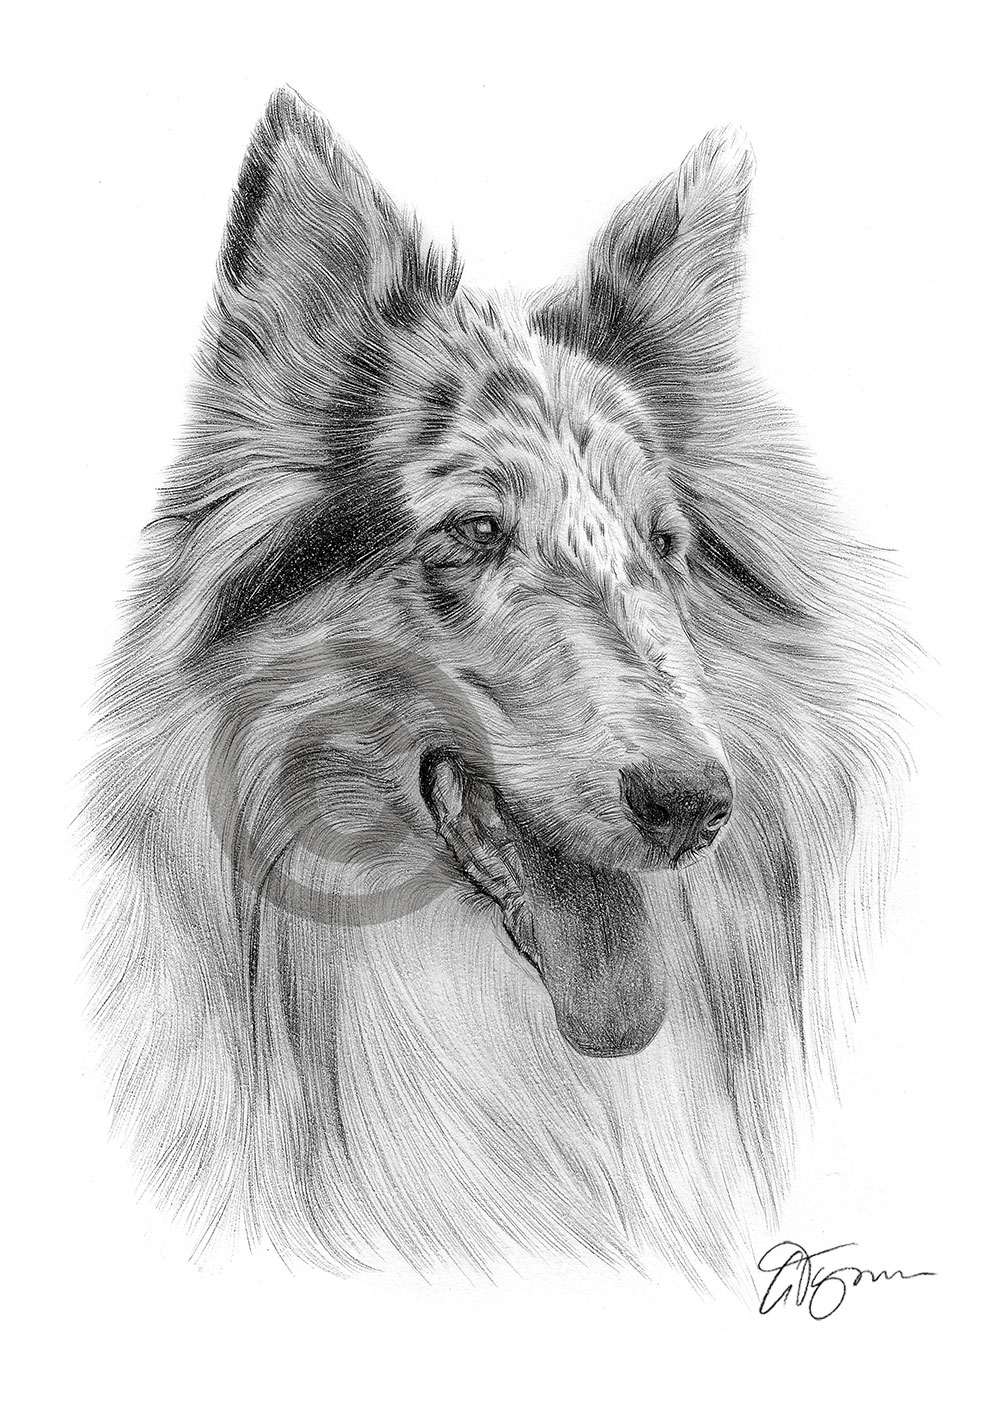 Pencil drawing of a Blue Merle Rough Collie by artist Gary Tymon